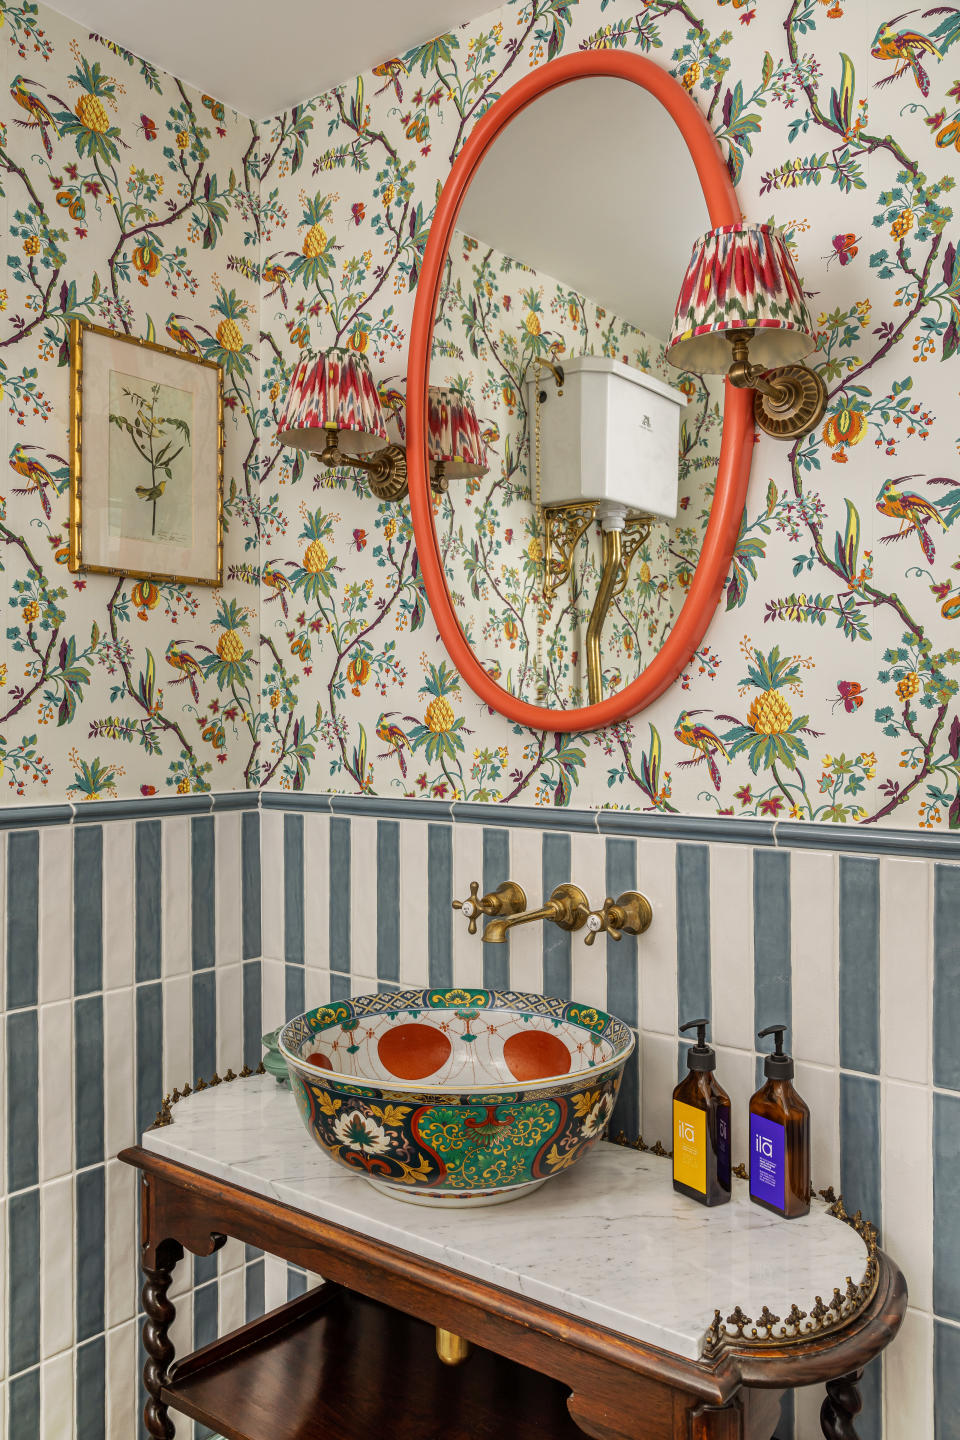 <p> The downstairs bathroom may be the smallest room of the house but this doesn’t mean it can’t take a punch of pattern. In fact, the powder room is the perfect space in which to go all out and clash your prints. </p> <p> ‘Pattern and color are integral to our design,’ says Lucy Barlow, creative director of Barlow & Barlow. ‘Mixing different patterns together always brings a room alive and creates a happy home! We love combining busy florals with simple stripes as they balance each other out whilst creating interest. Try playing around with contrasting materials, too, such as a vibrant wallpaper next to fun tiles. Smaller spaces such as a bathroom are the best places to start when it comes to pattern.’ </p>